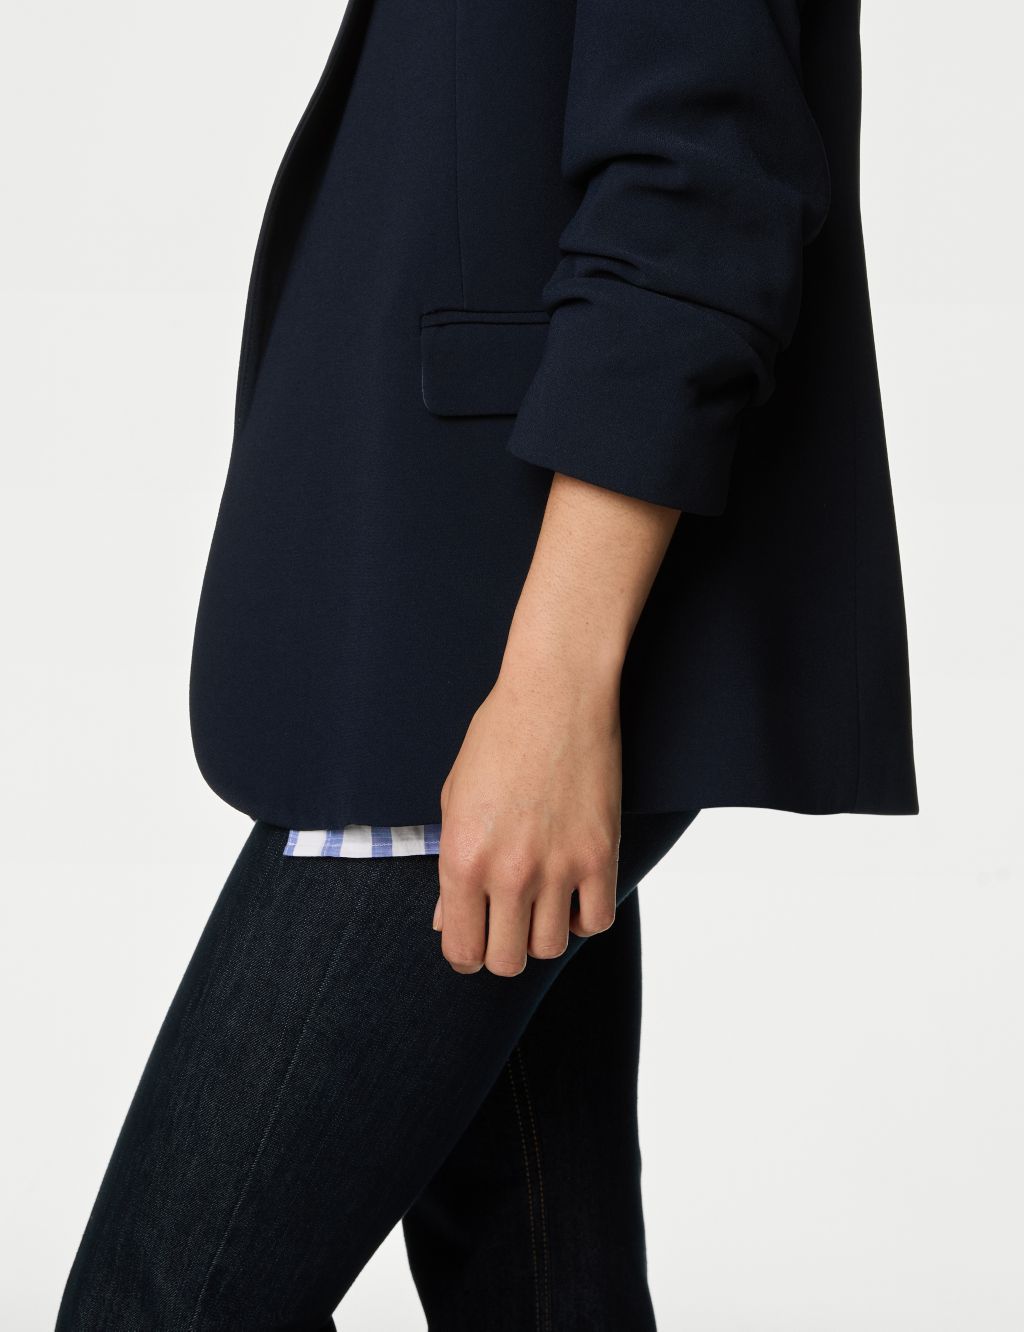 Relaxed Ruched Sleeve Blazer image 3